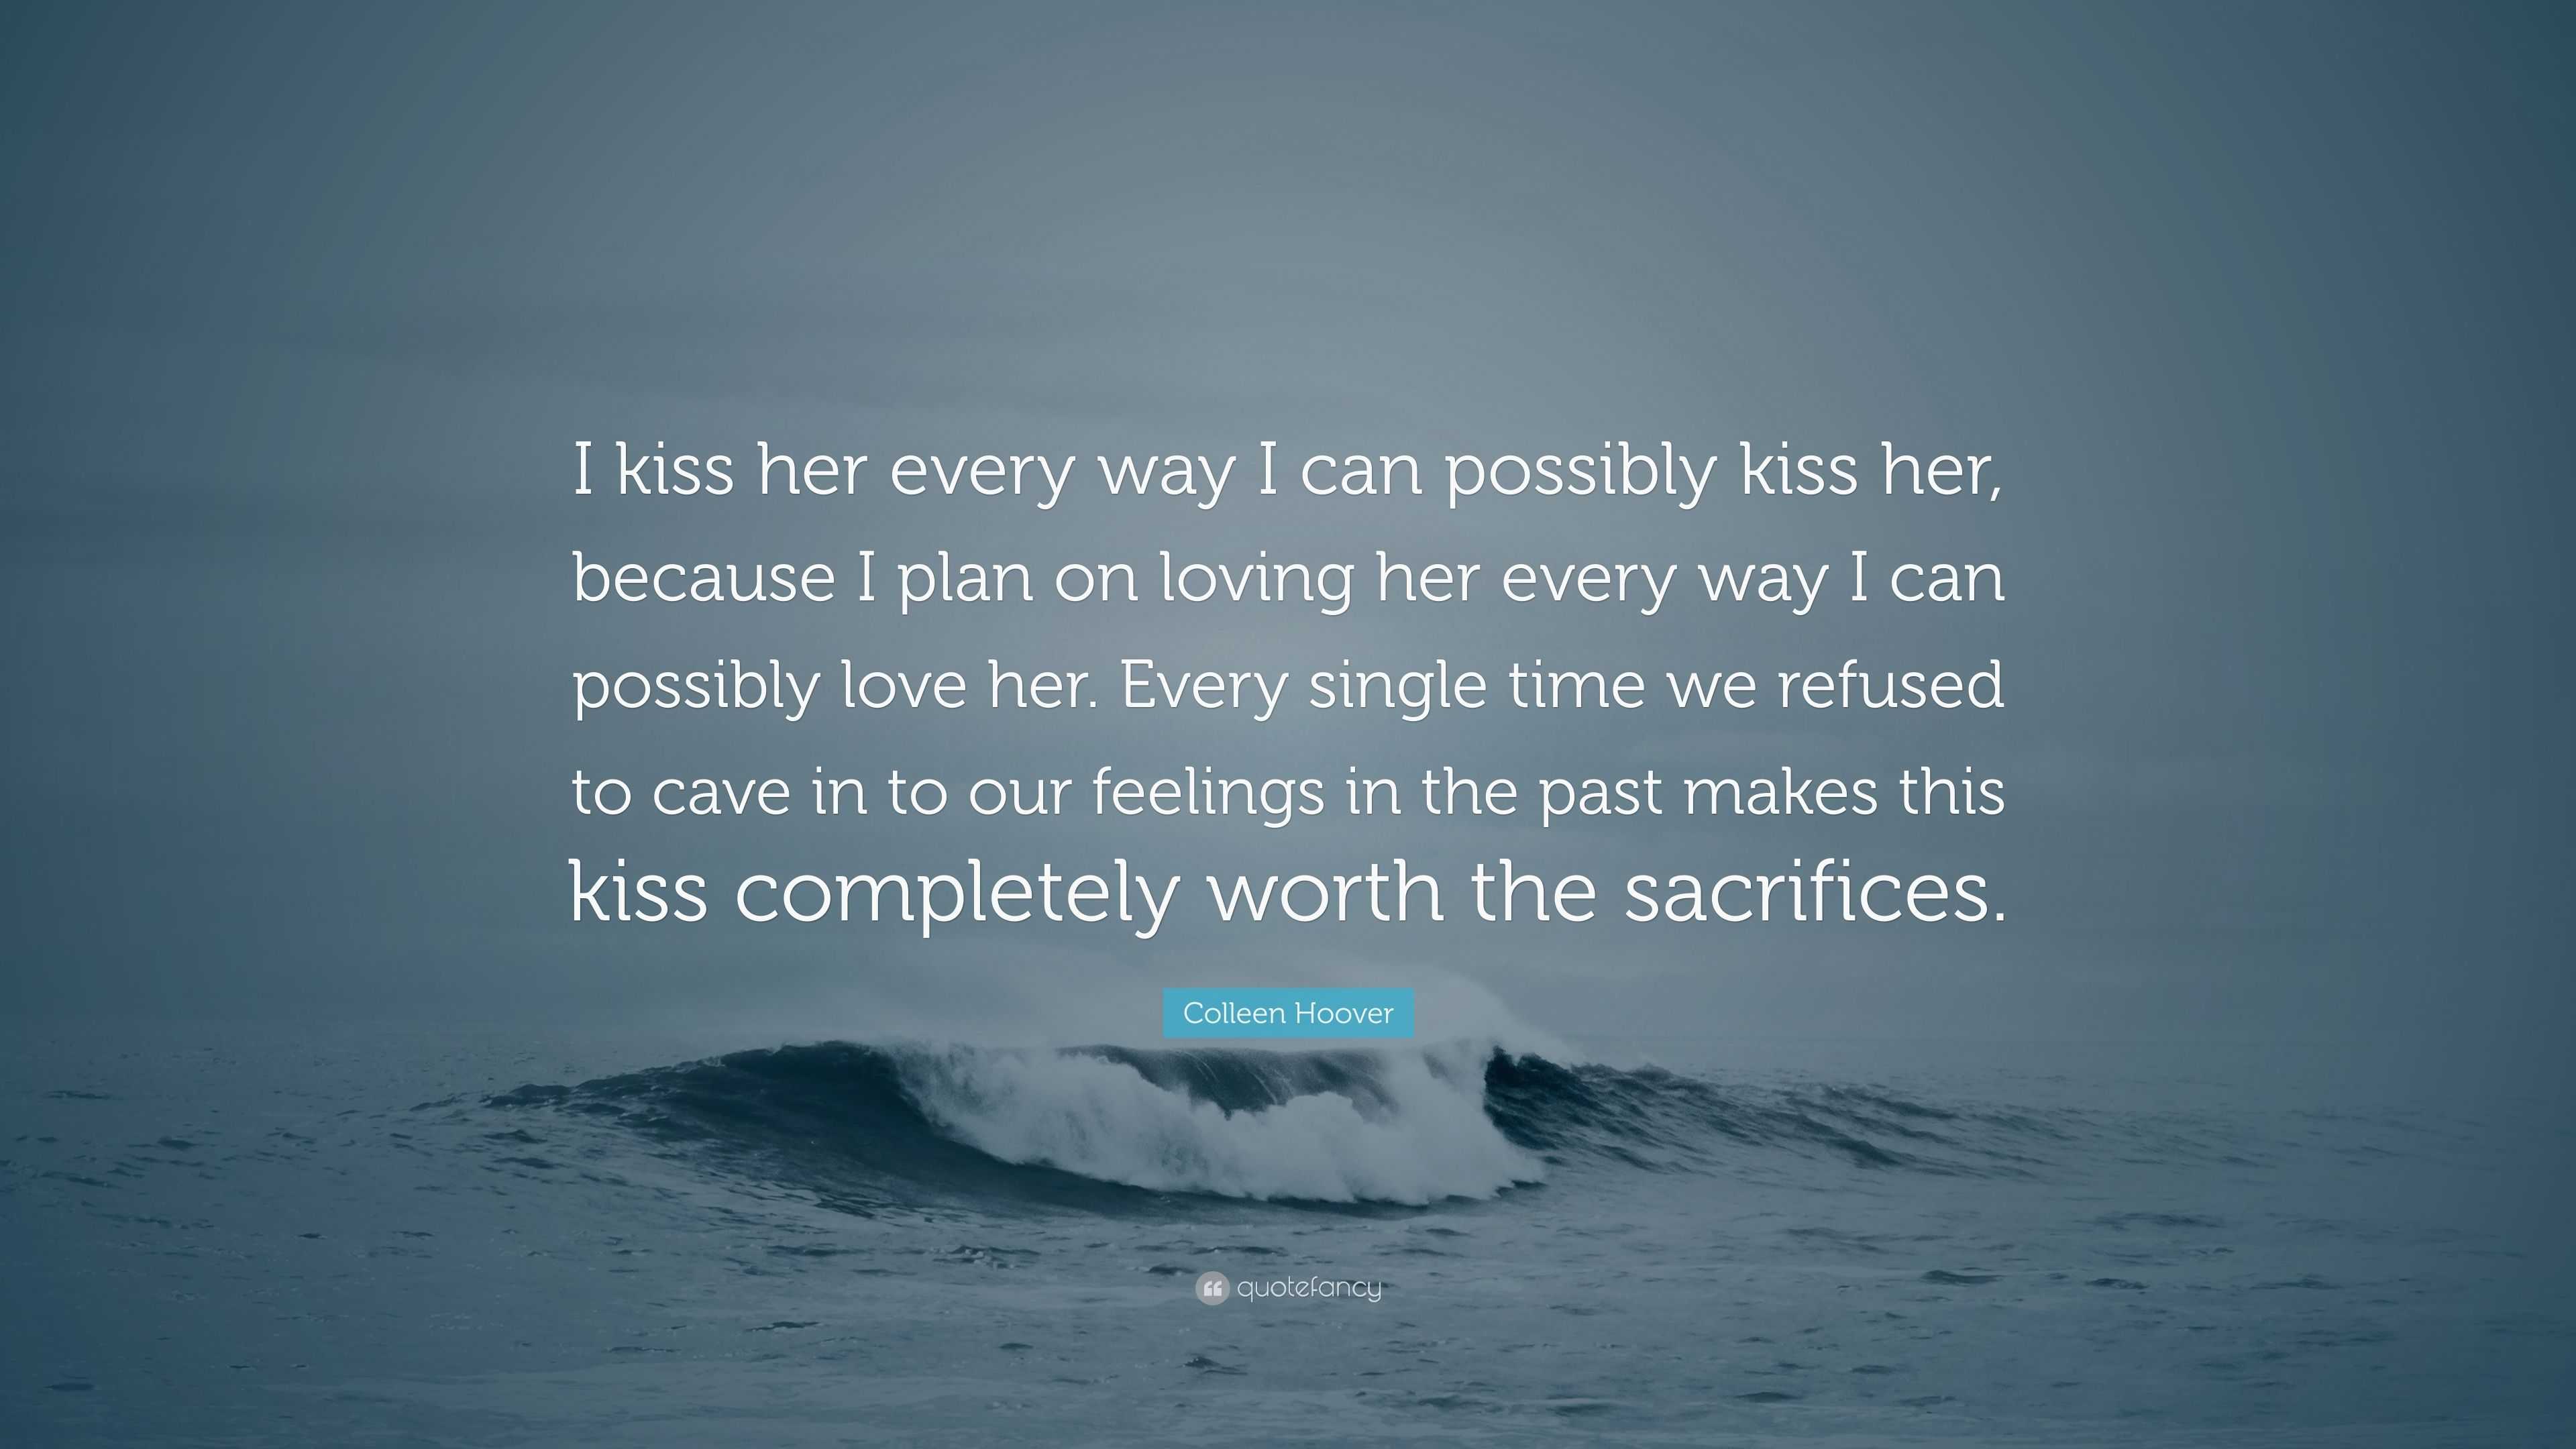 Colleen Hoover Quote: "I kiss her every way I can possibly kiss her, because I plan on loving ...